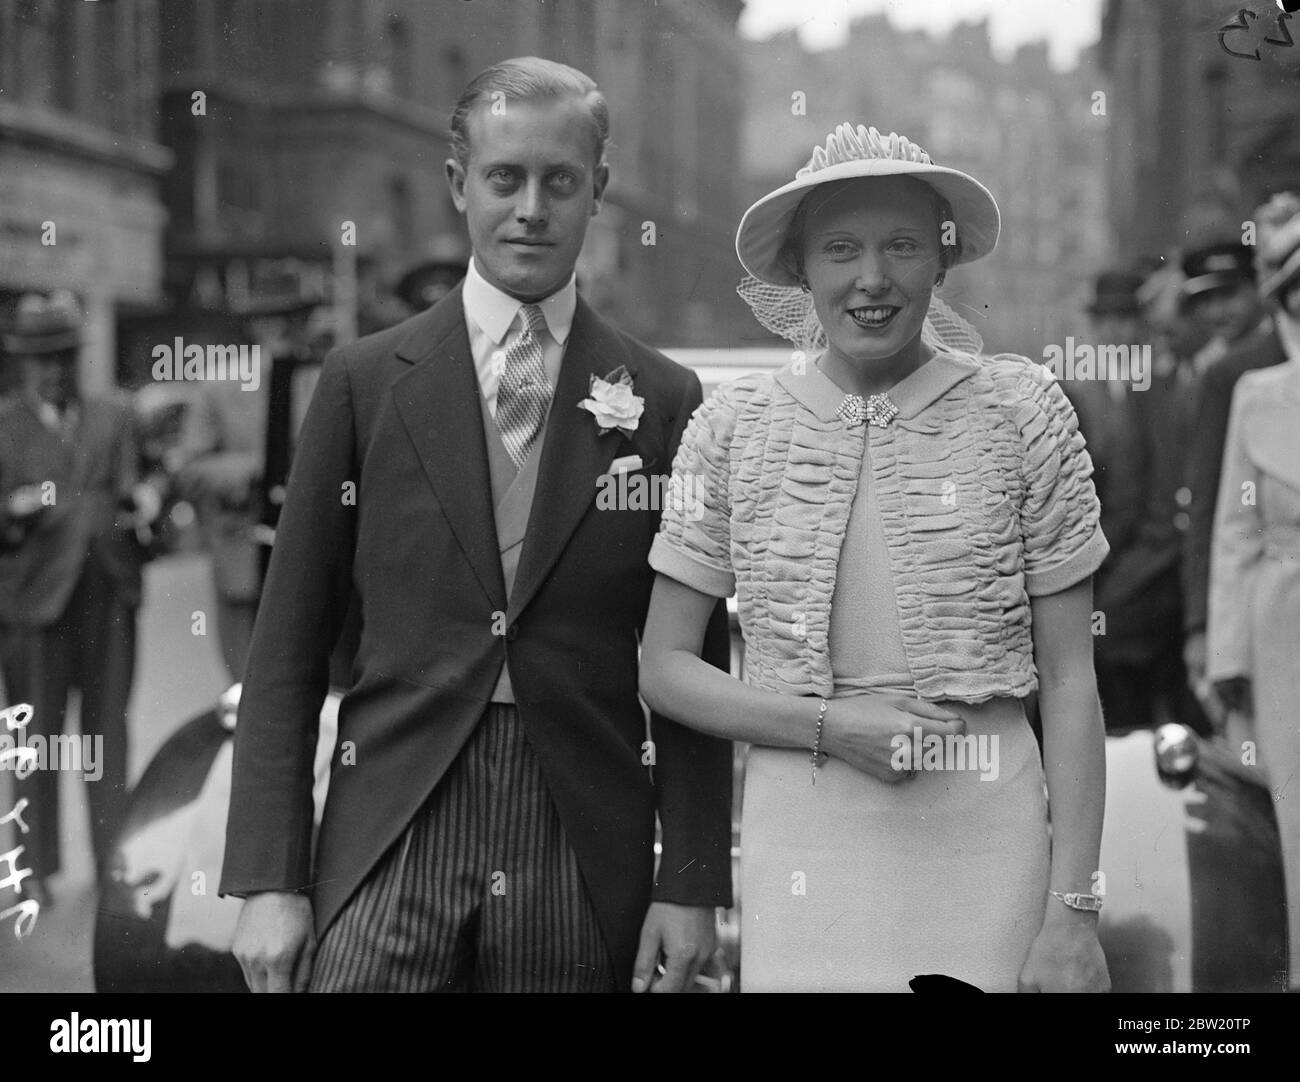 Earl of Normanton weds, daughter of Baroness Zouche at London Register Office. The Earl of Normanton was married to 31-year-old Mrs Palmer, daughter of Baroness Zouche, at Caxton Hall register office, London. The Earl is 27. The civil ceremony was followed by a religious ceremony at St Ethelburga's Bishopsgate. Photo shows, the bride and bridegroom leaving the Caxton Hall after their wedding. 5 July 1937 Stock Photo